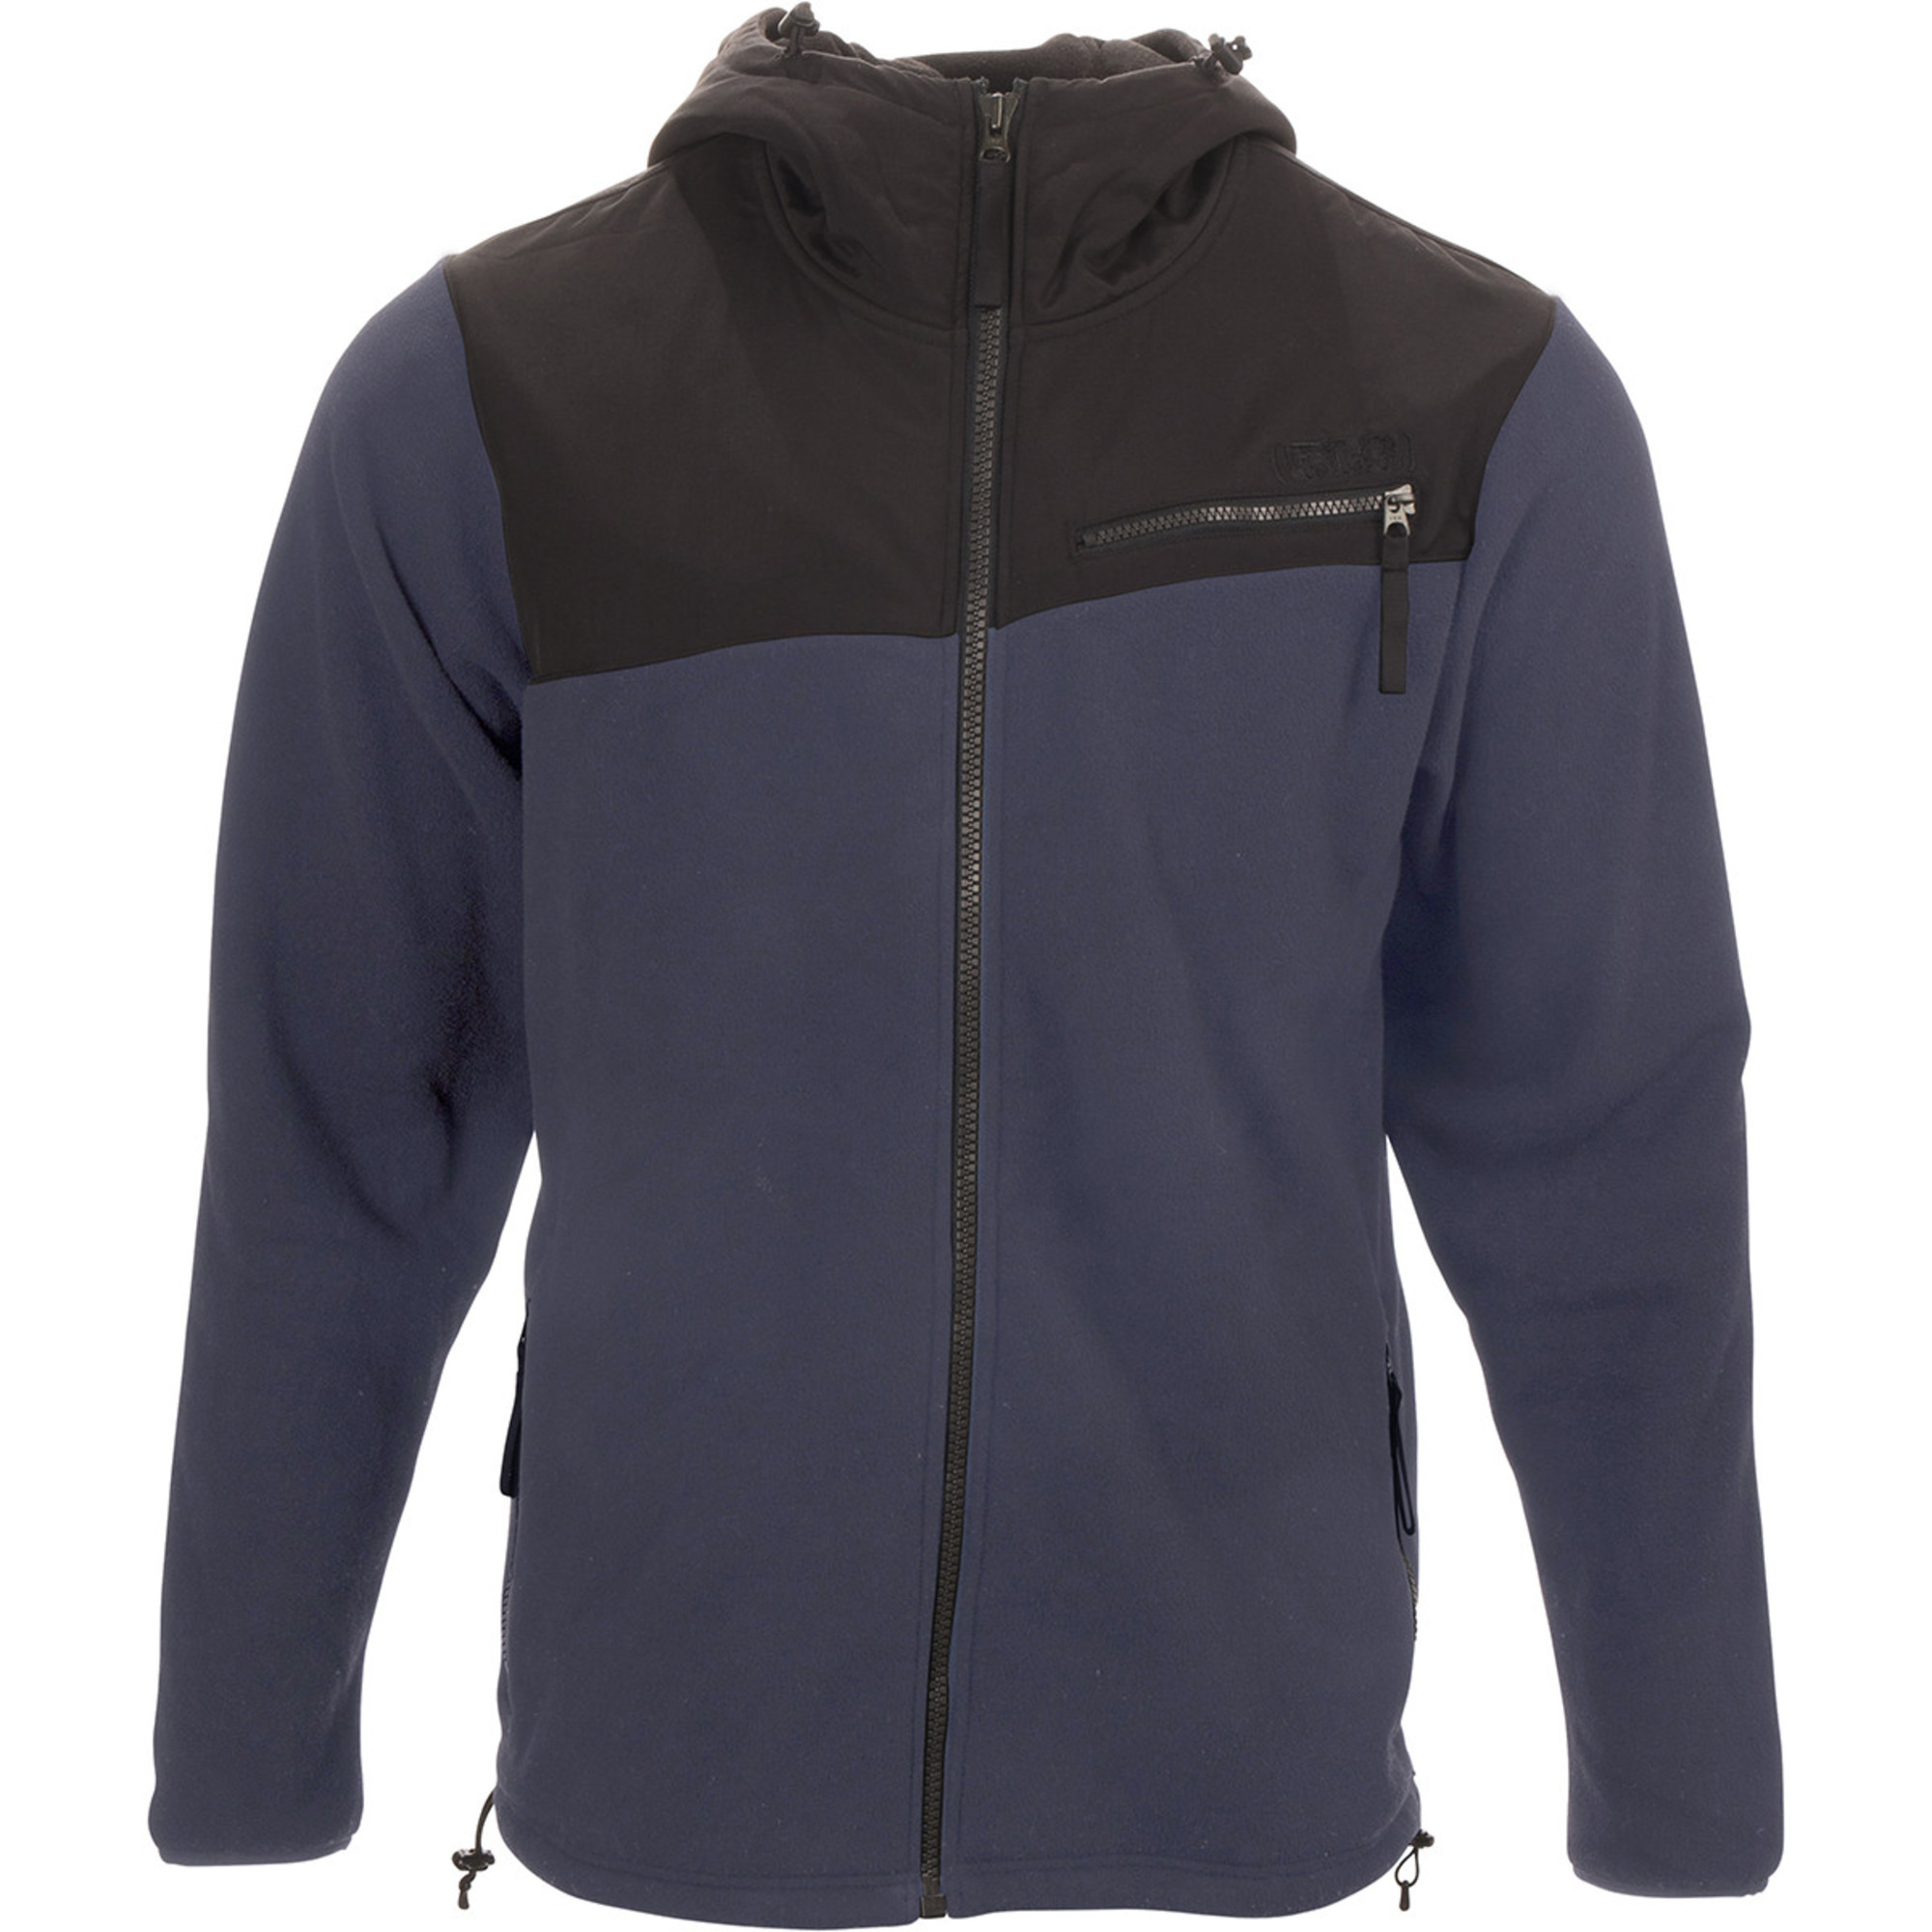 509 top baselayers adult stroma expedition weight hoodie